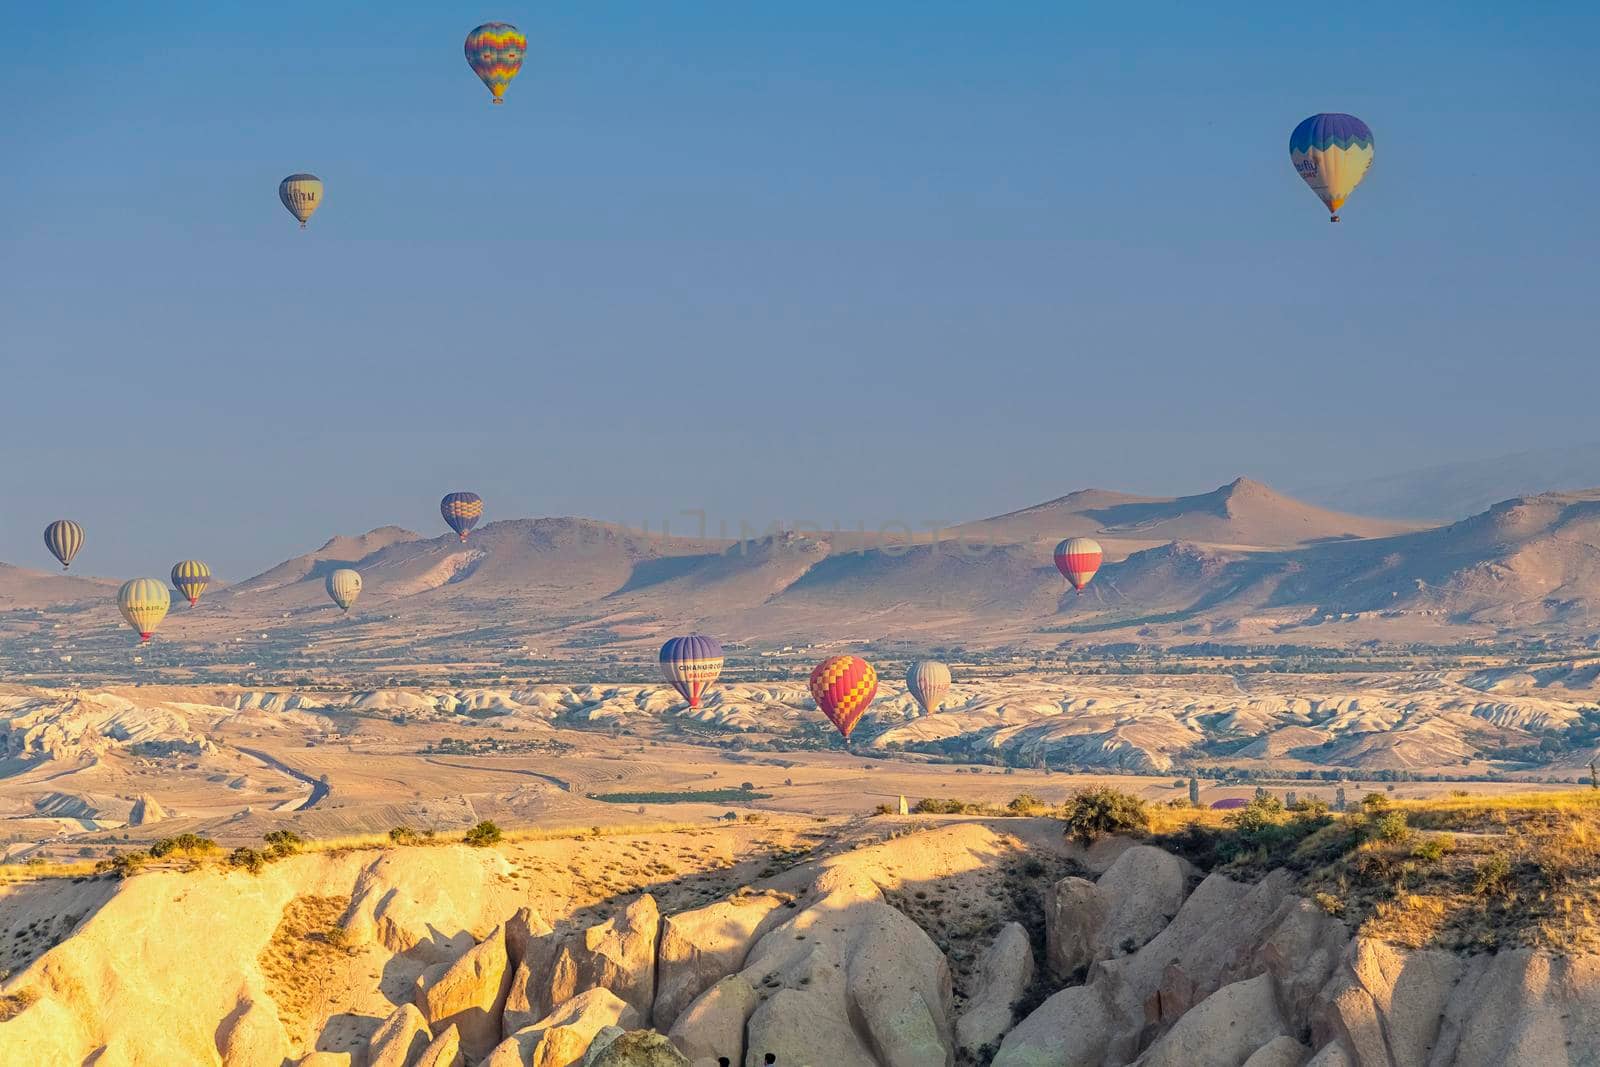 Cappadocia Turkey 08.01.2021 Large colored hot air balloons fly against the backdrop of mountain landscapes at sunrise early in the morning. by Leoschka